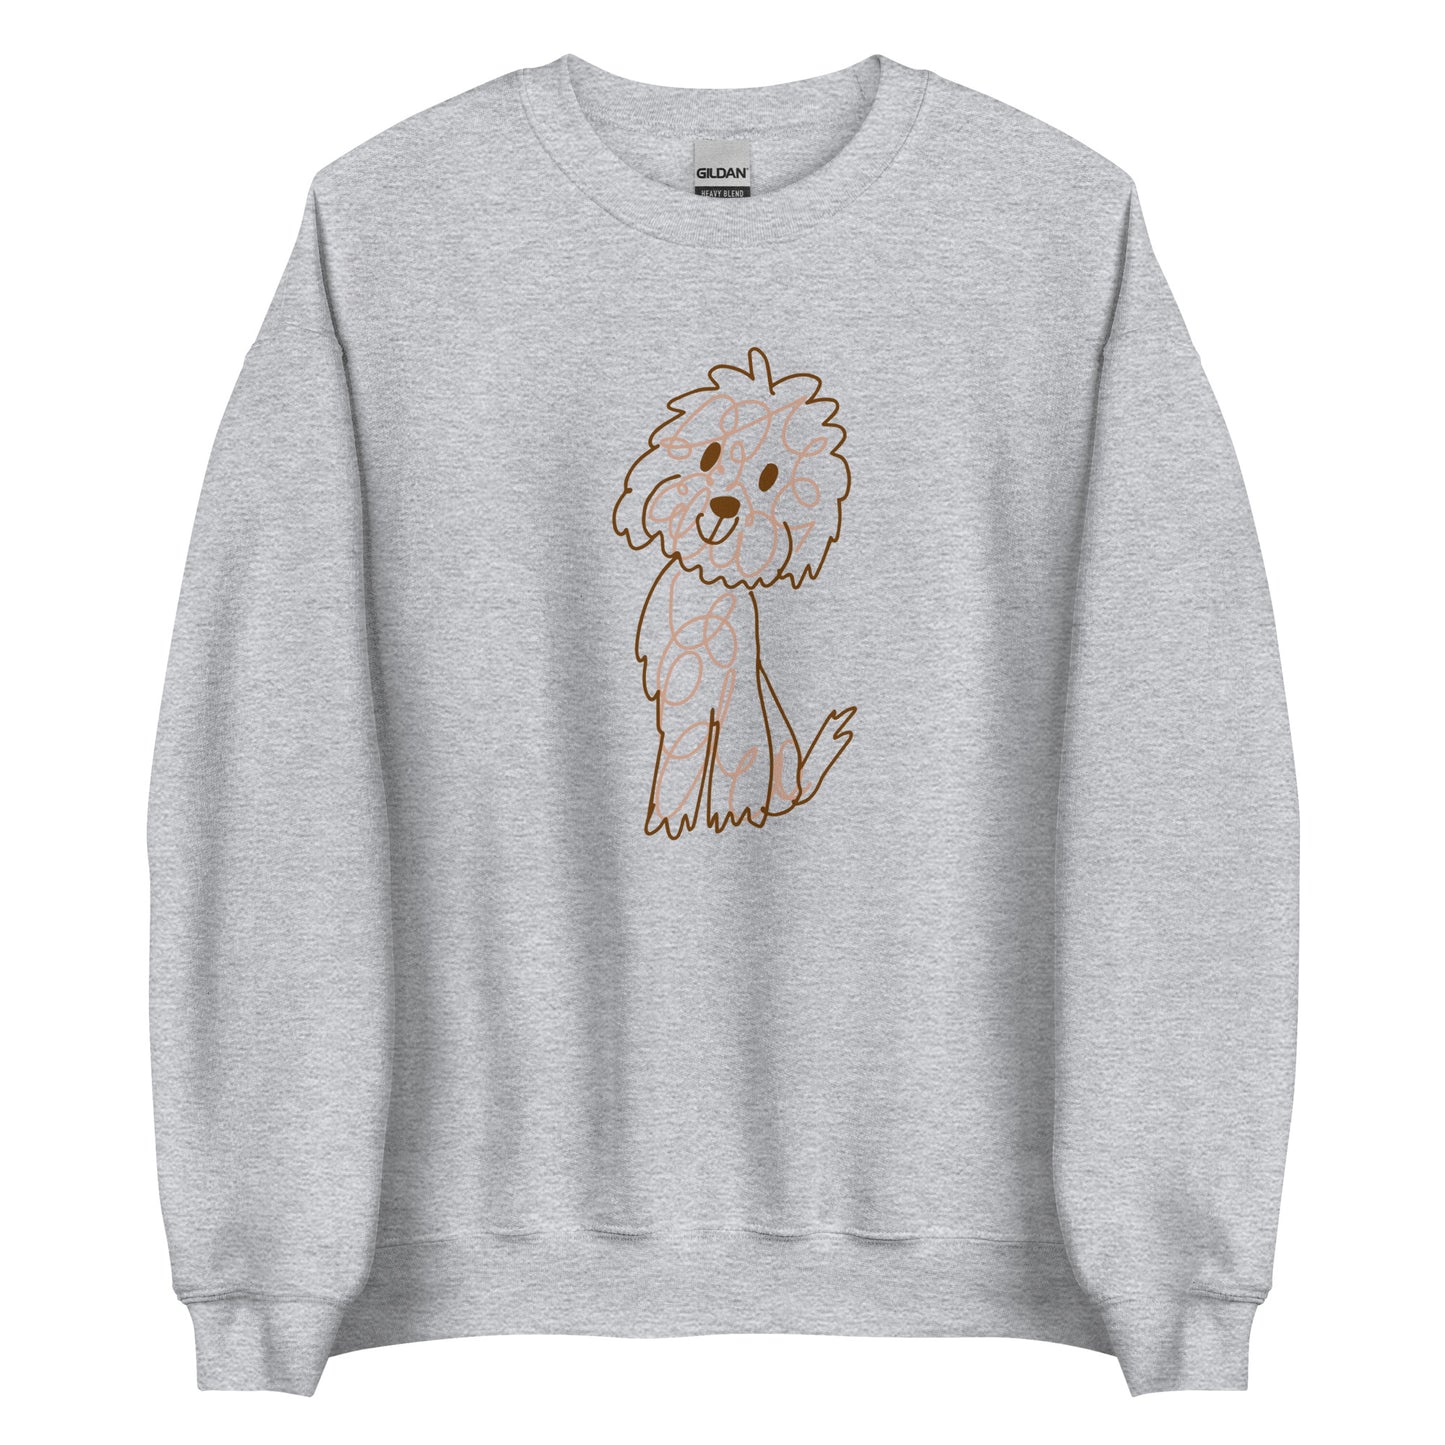 Crew Neck Sweatshirt with doodle dog drawn with fine lines sport grey color